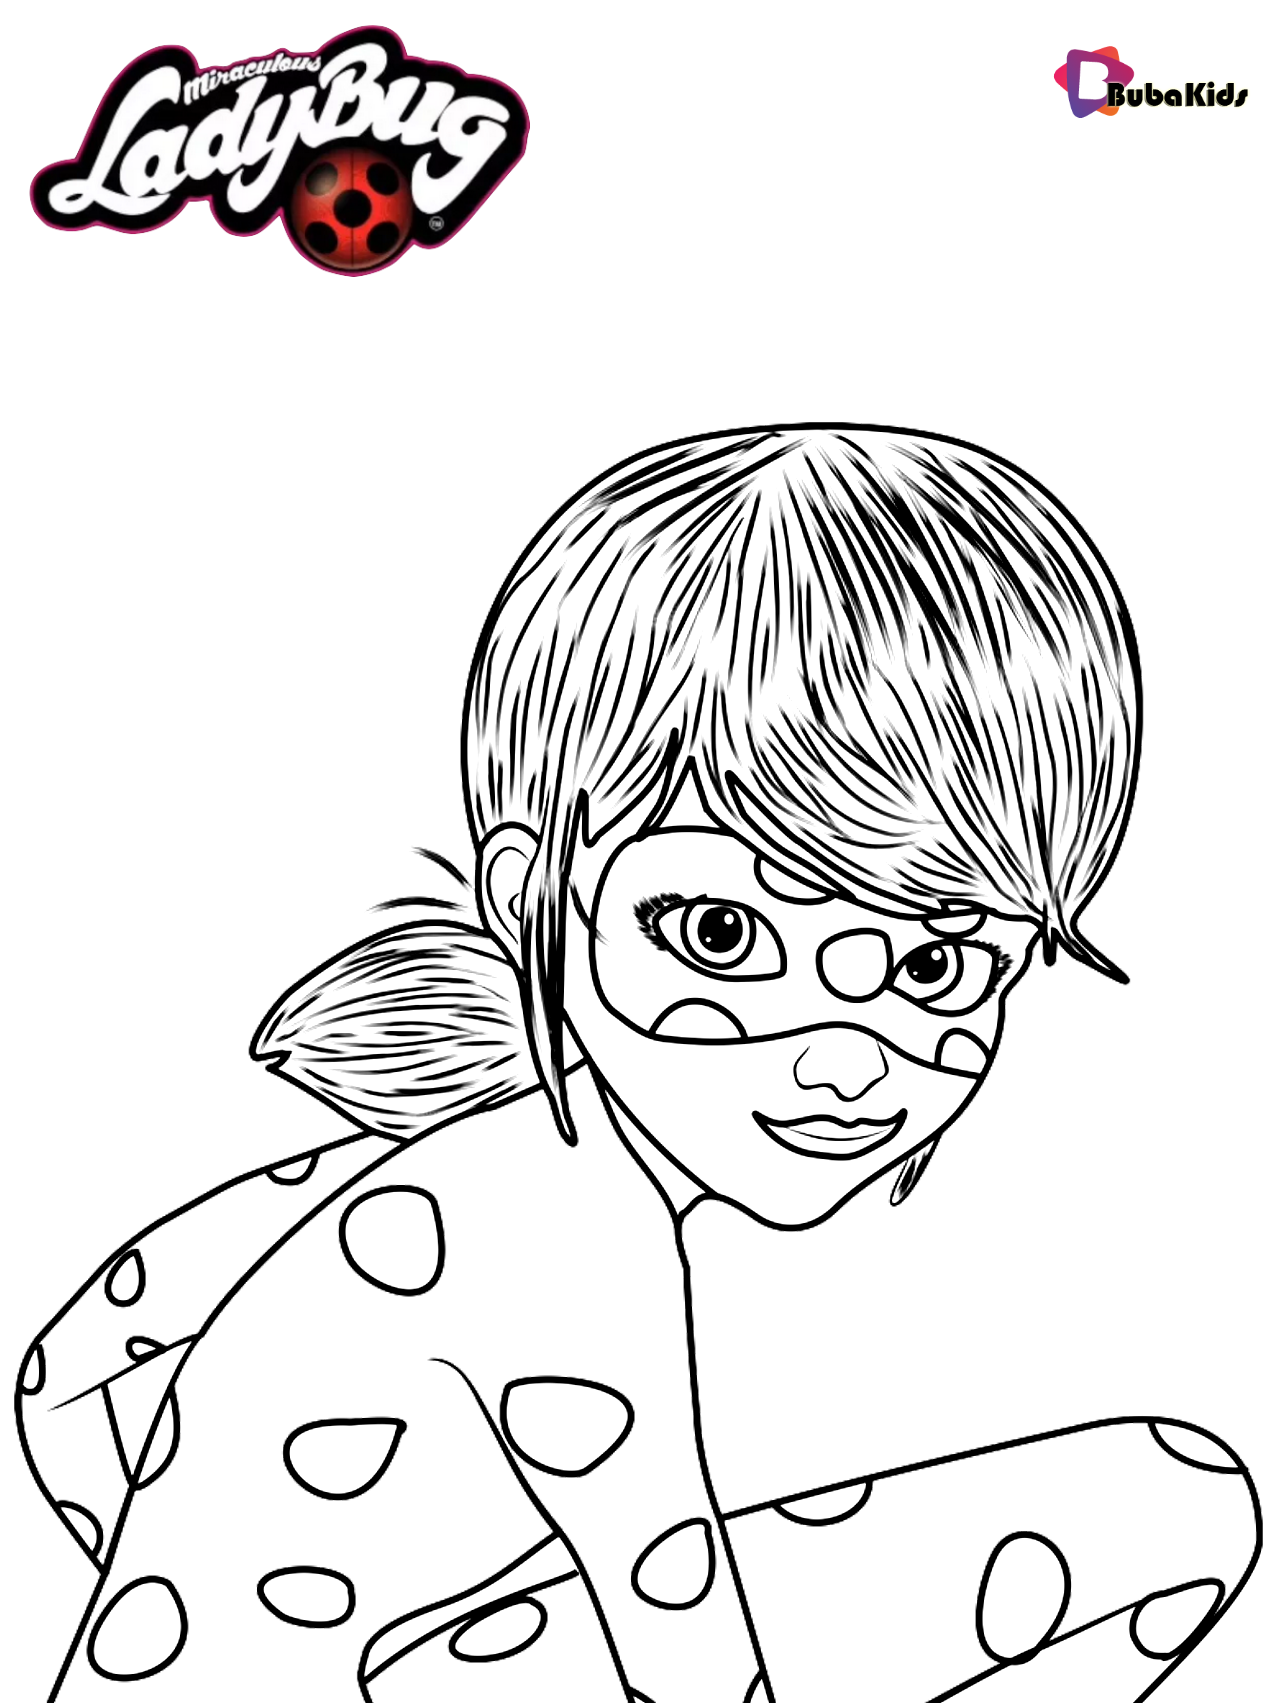 Miraculous ladybug coloring page Wallpaper